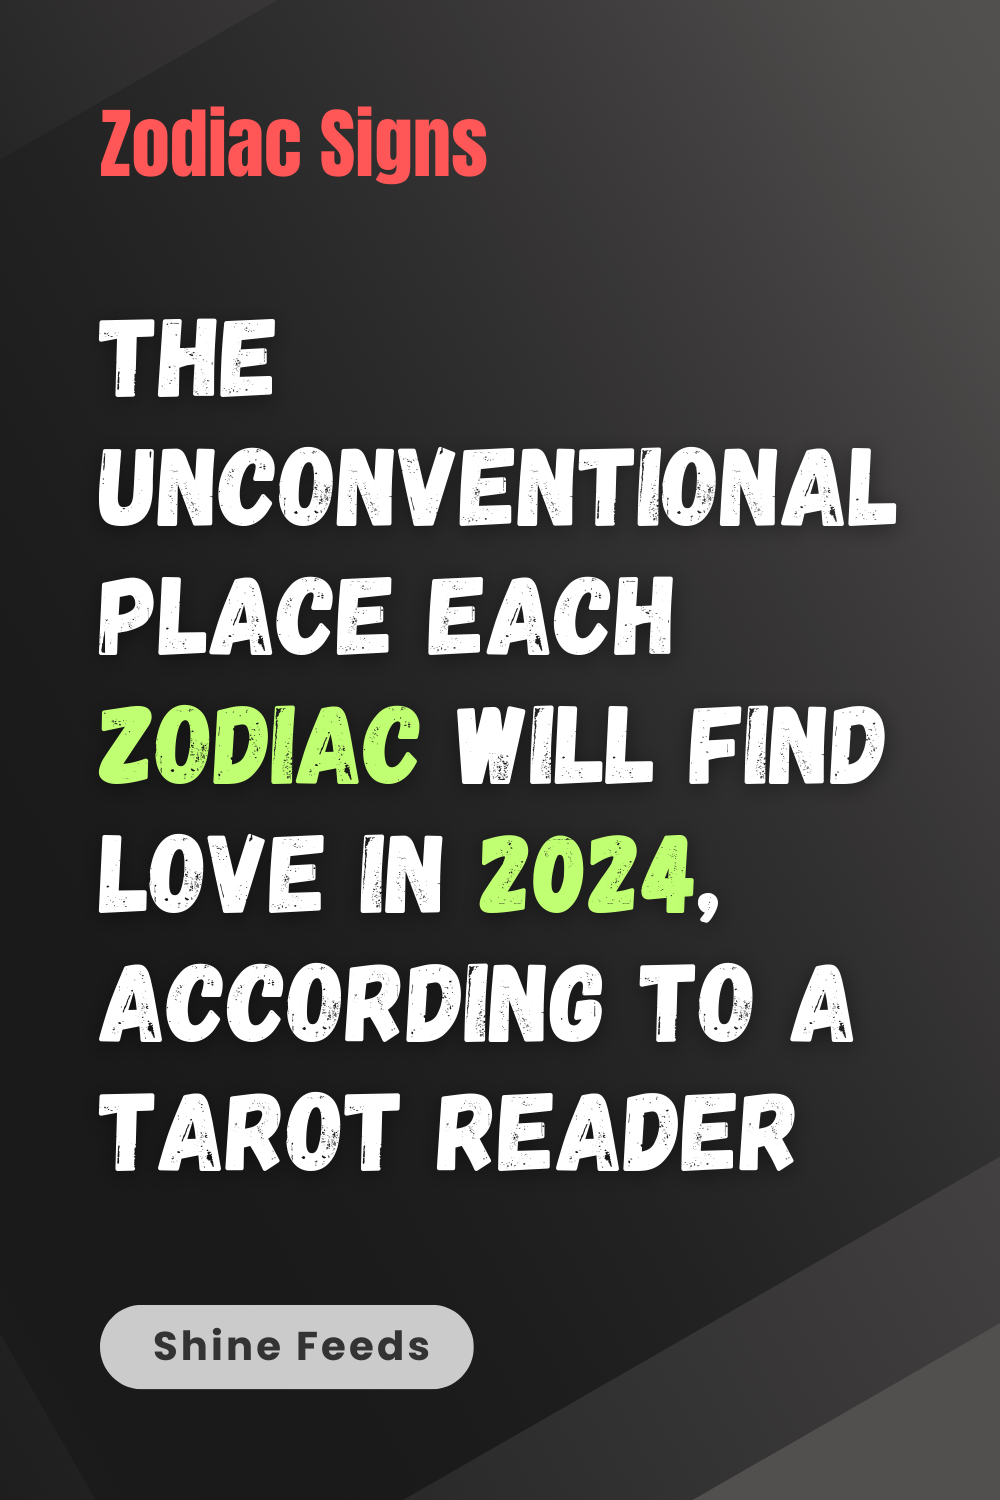 The Unconventional Place Each Zodiac Will Find Love In 2024, According To A Tarot Reader